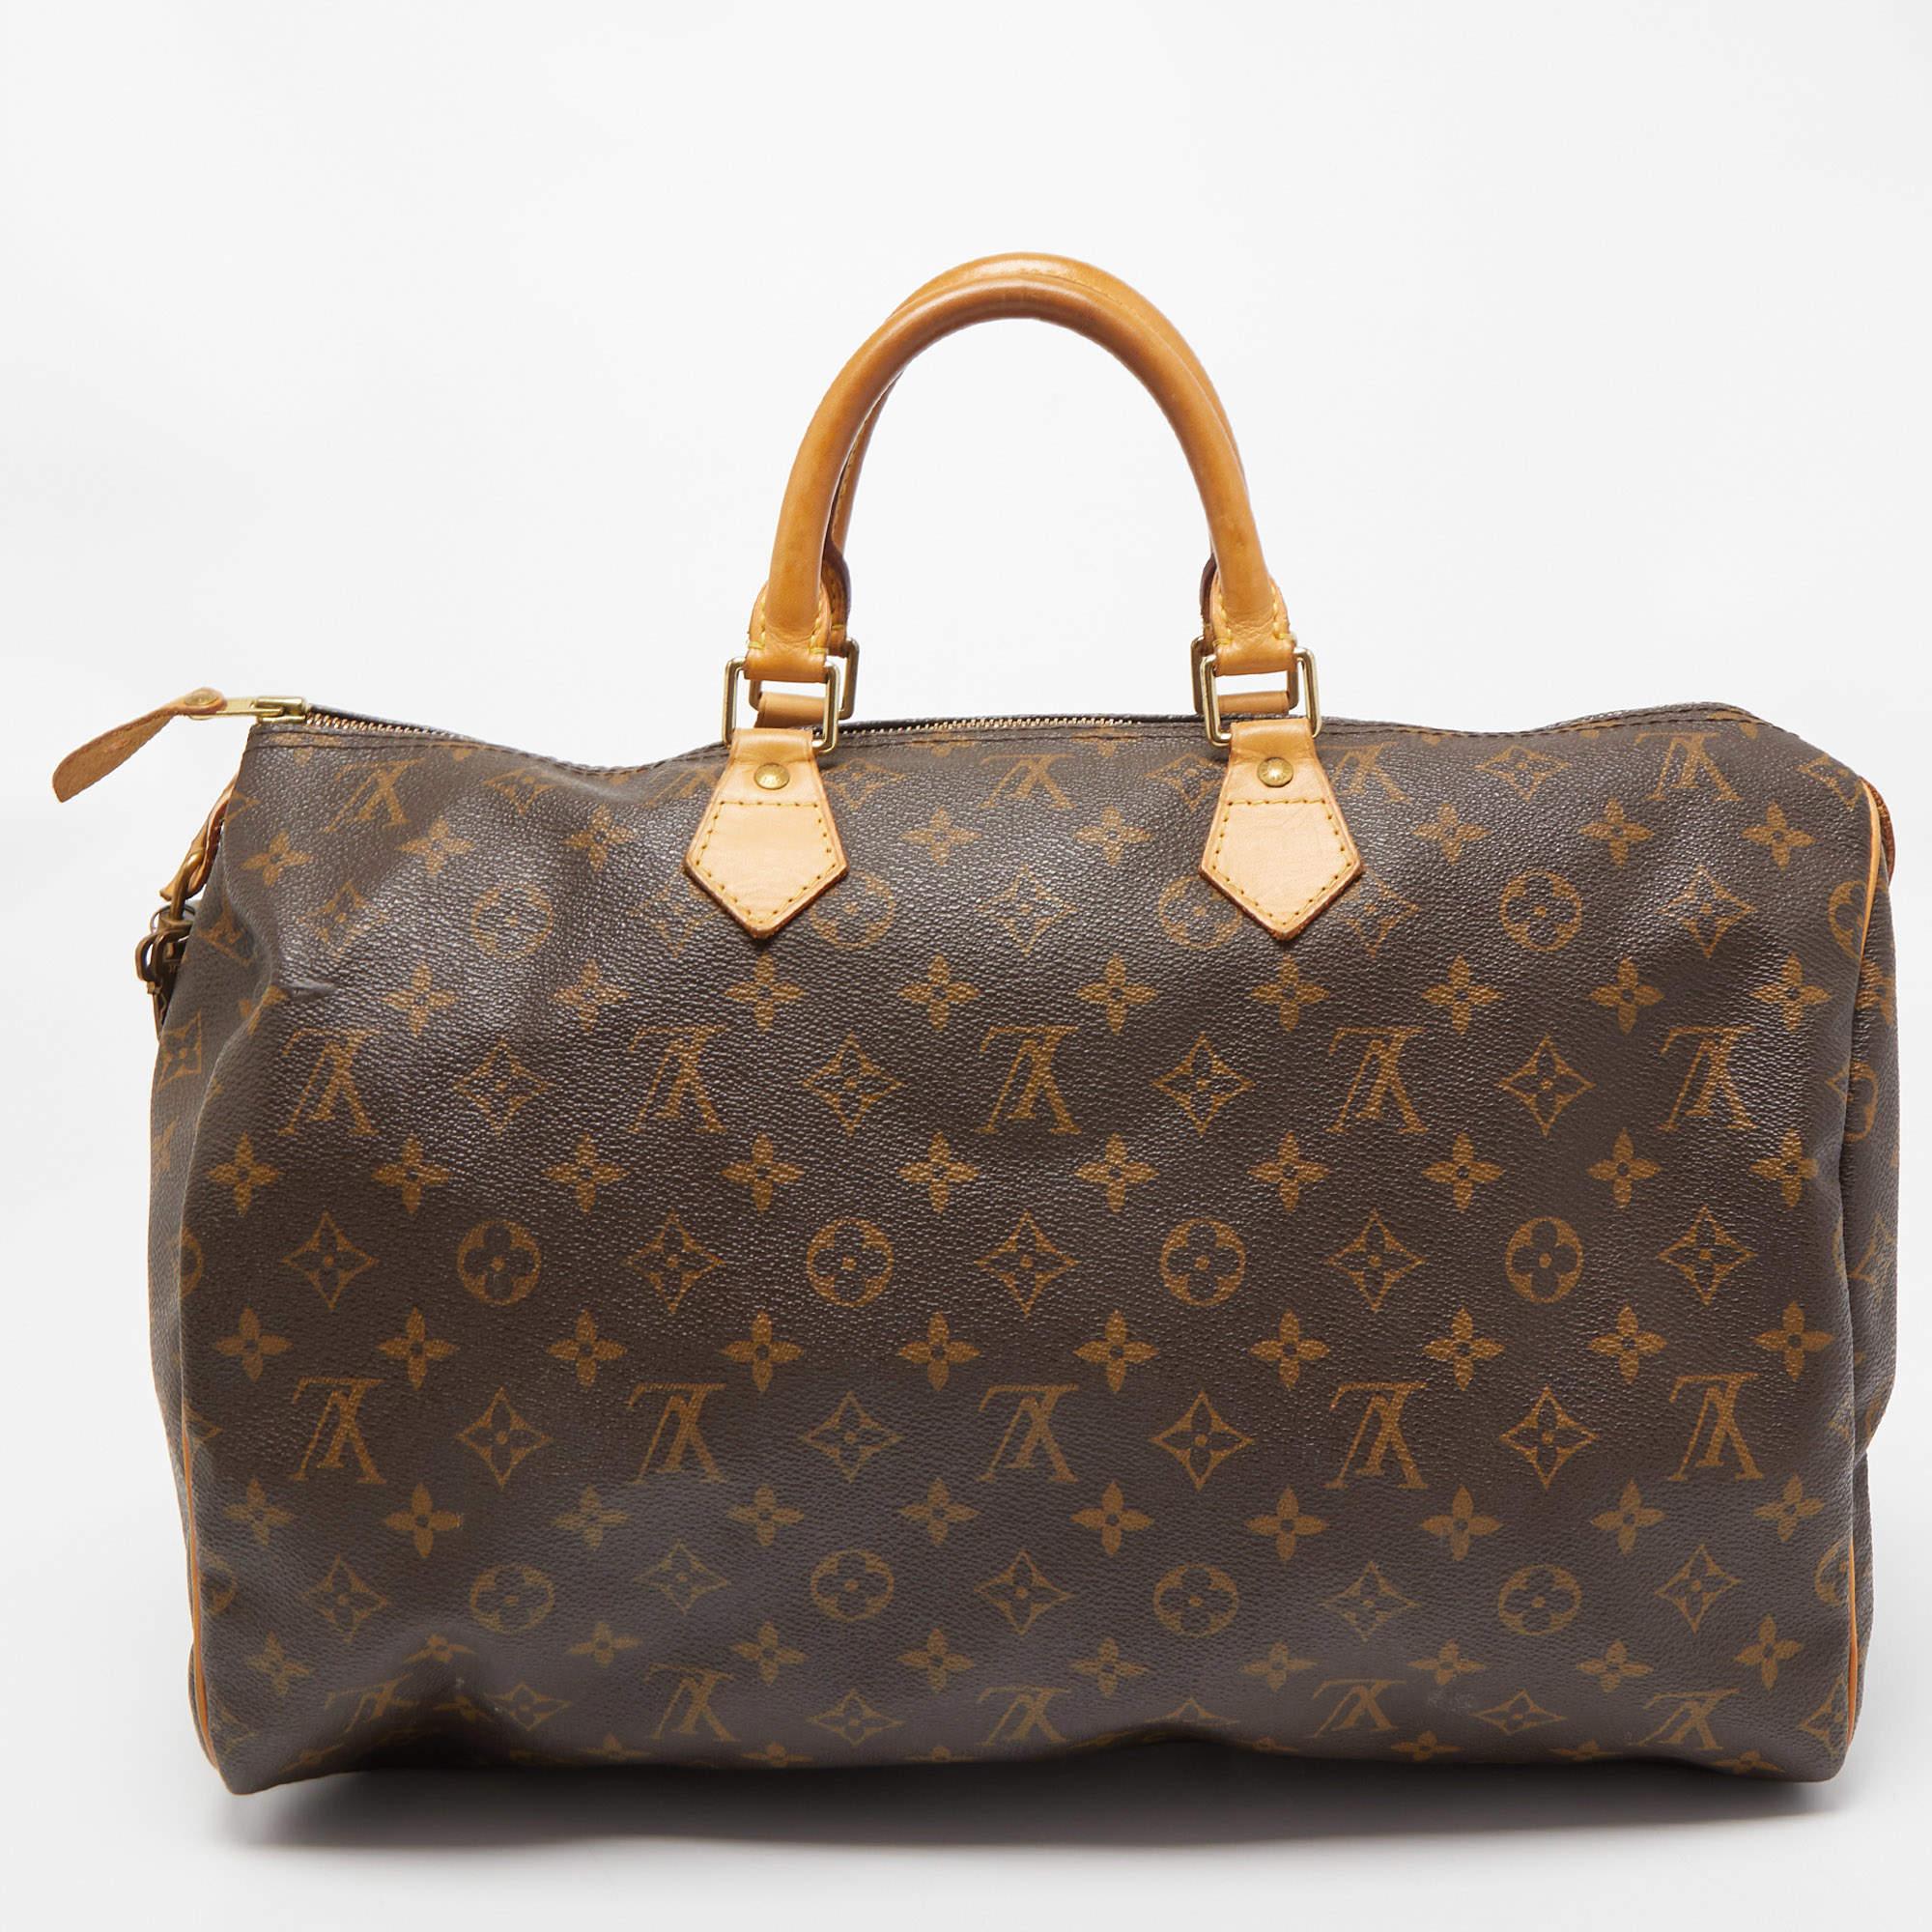 A classic handbag comes with the promise of enduring appeal, boosting your style time and again. This LV Speedy 40 bag is one such creation. It’s a fine purchase.

